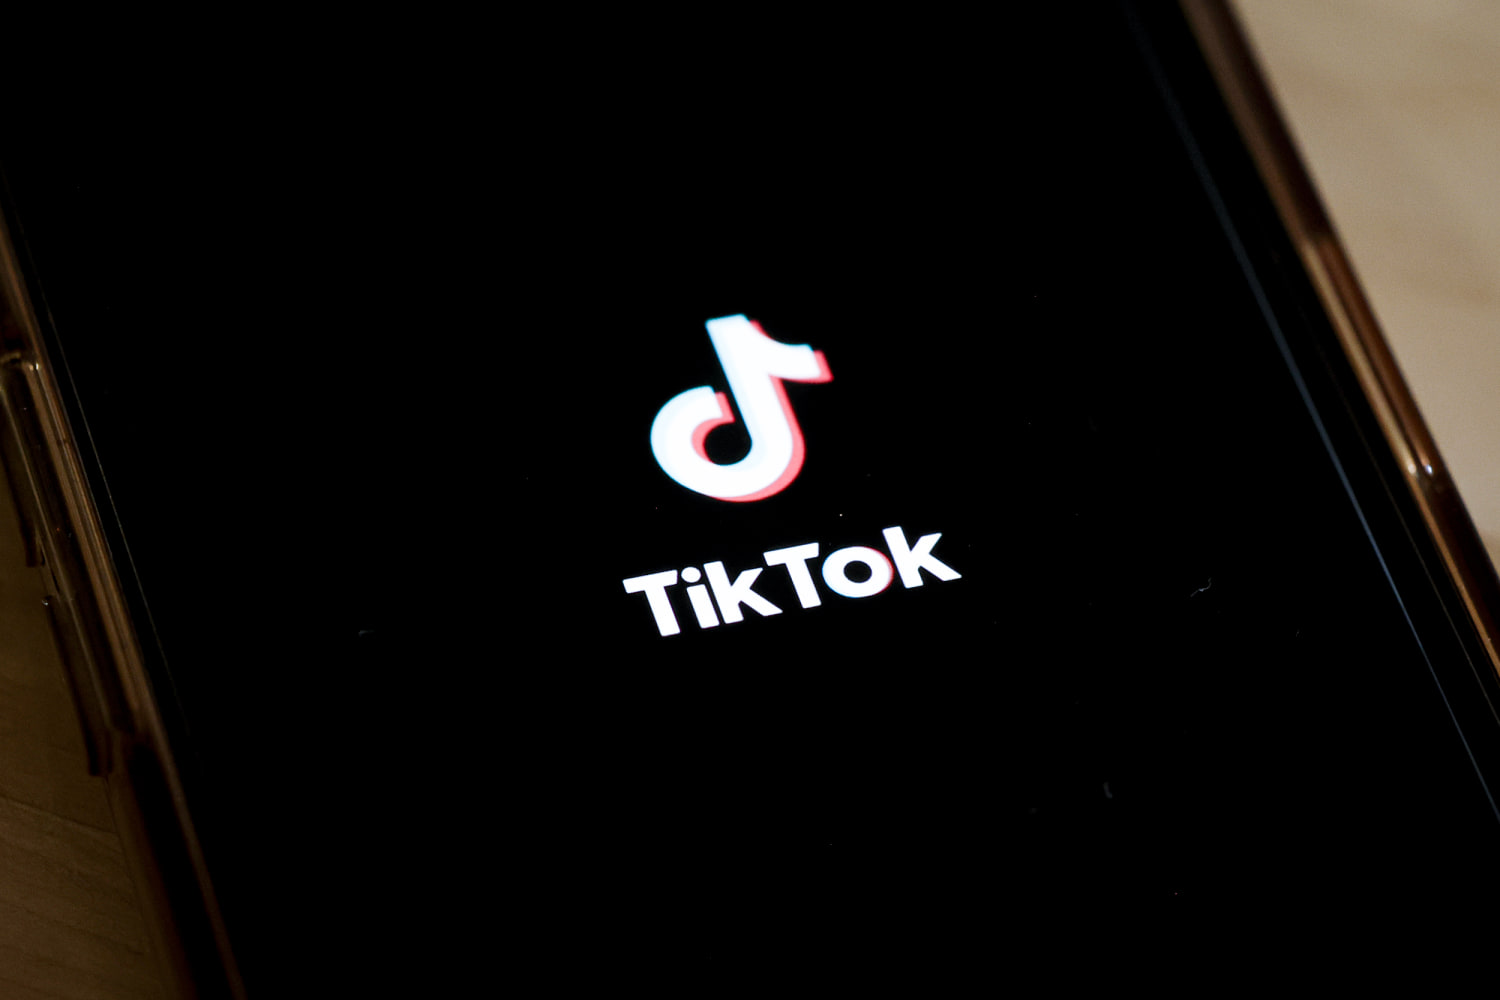 I co-authored the TikTok bill. Here’s what it’s really about.